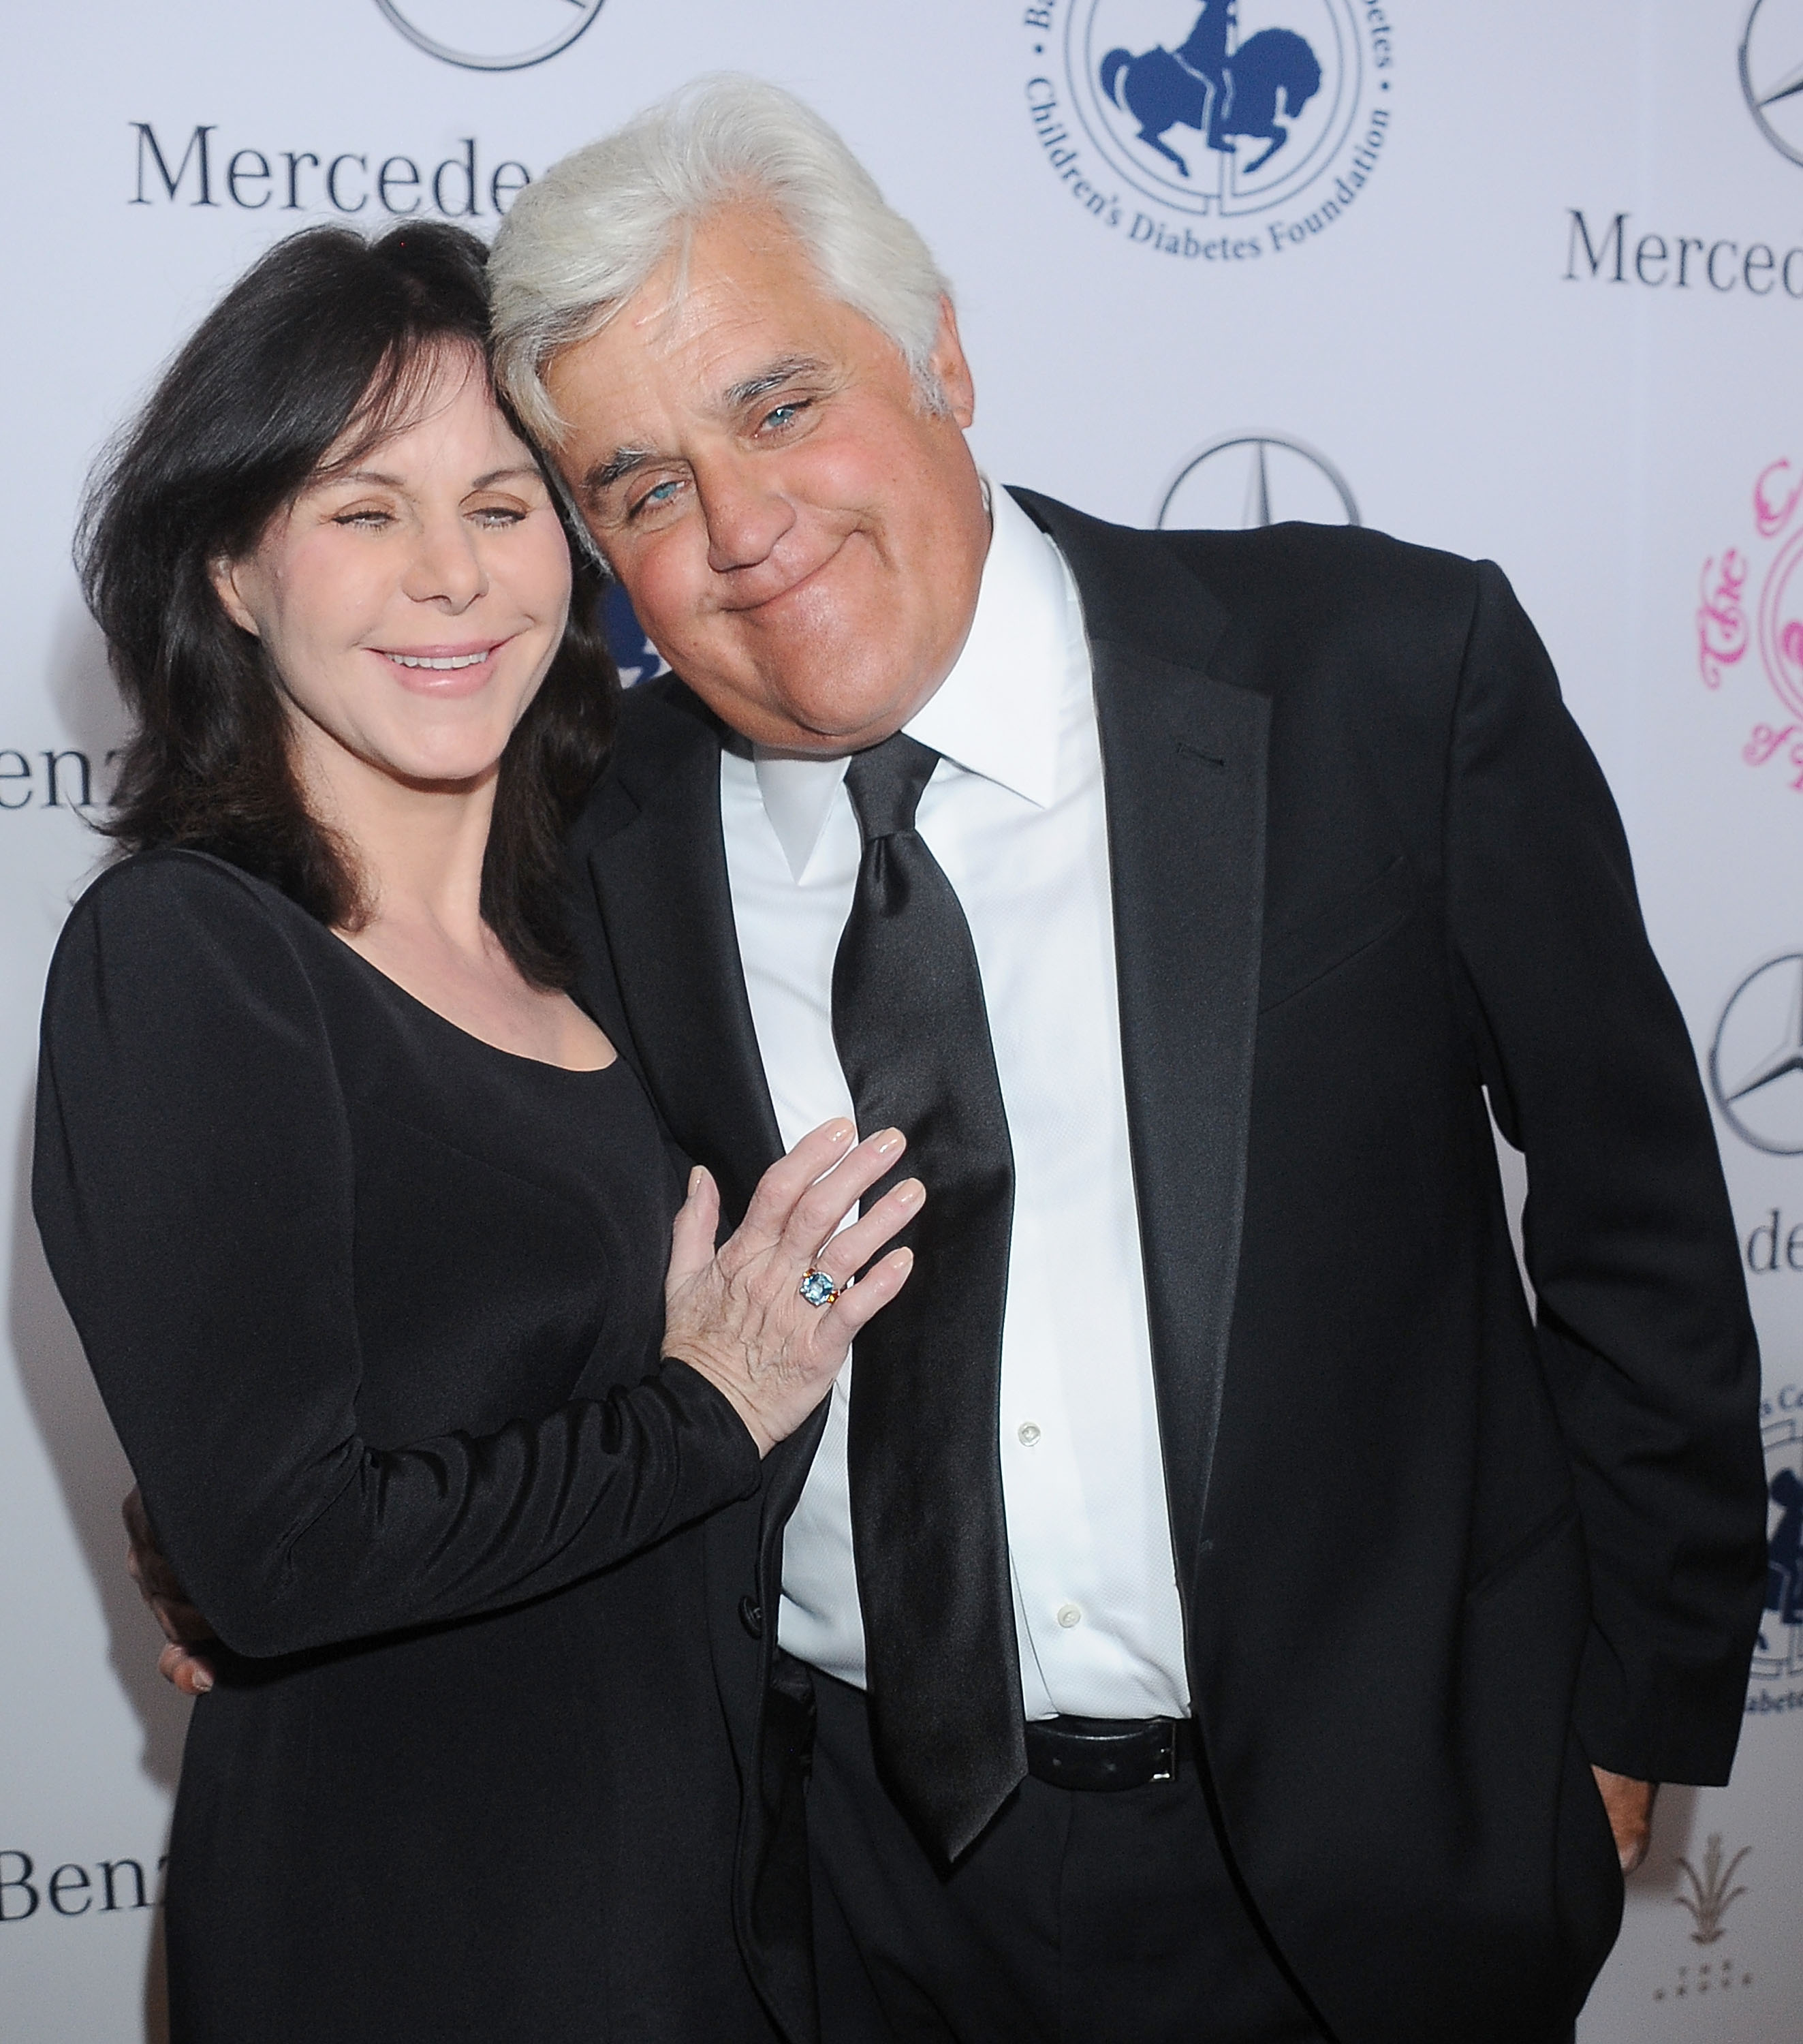 Jay Leno and wife, Mavis Leno, arrive at the 2014 Carousel Of Hope Ball Presented By Mercedes-Benz at The Beverly Hilton Hotel on October 11, 2014 in Beverly Hills, California. | Source: Getty Images